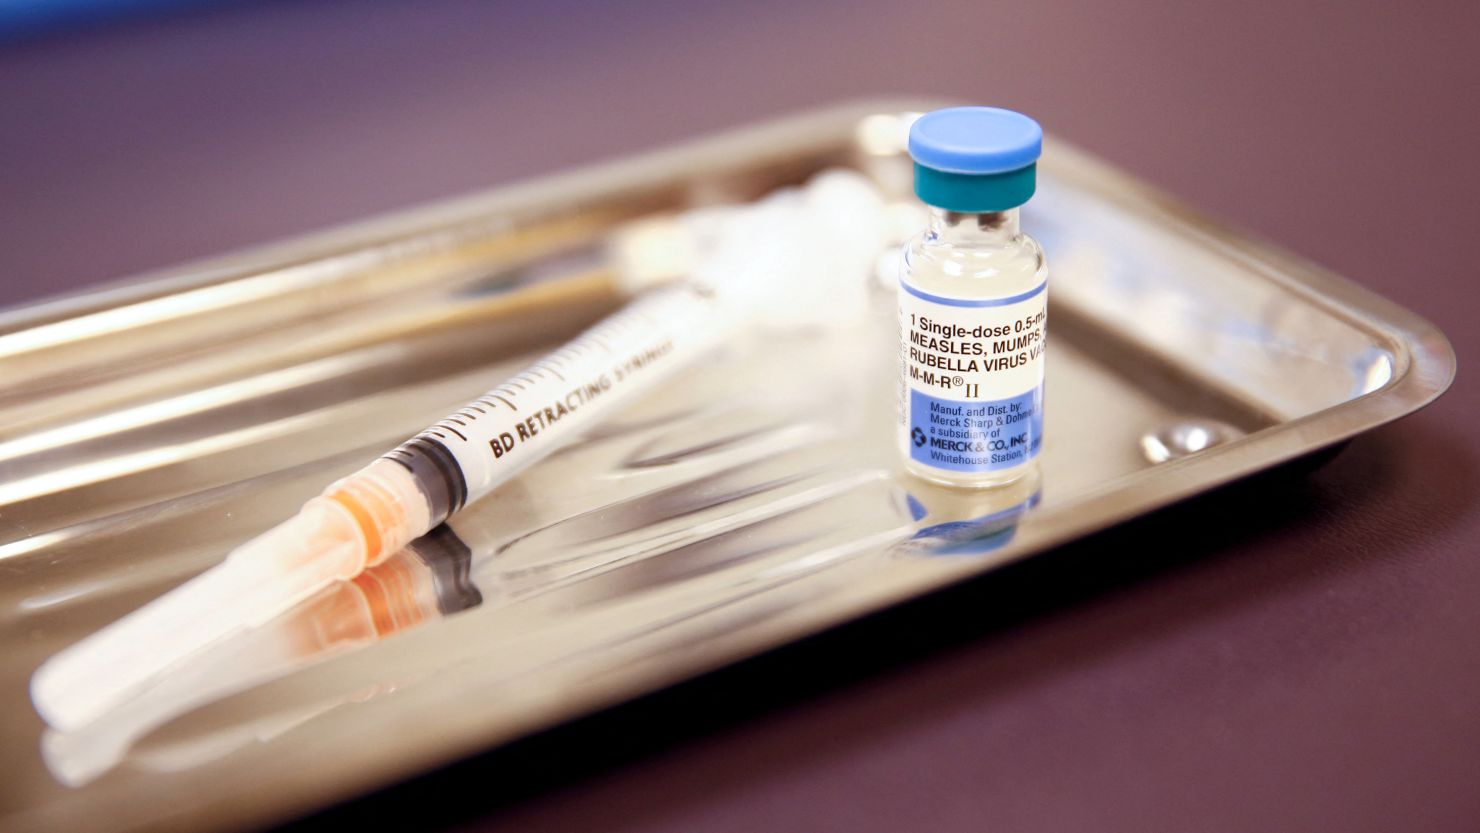 A vial of the measles, mumps, and rubella (MMR) vaccine is pictured at the International Community Health Services clinic in Seattle, Washington.